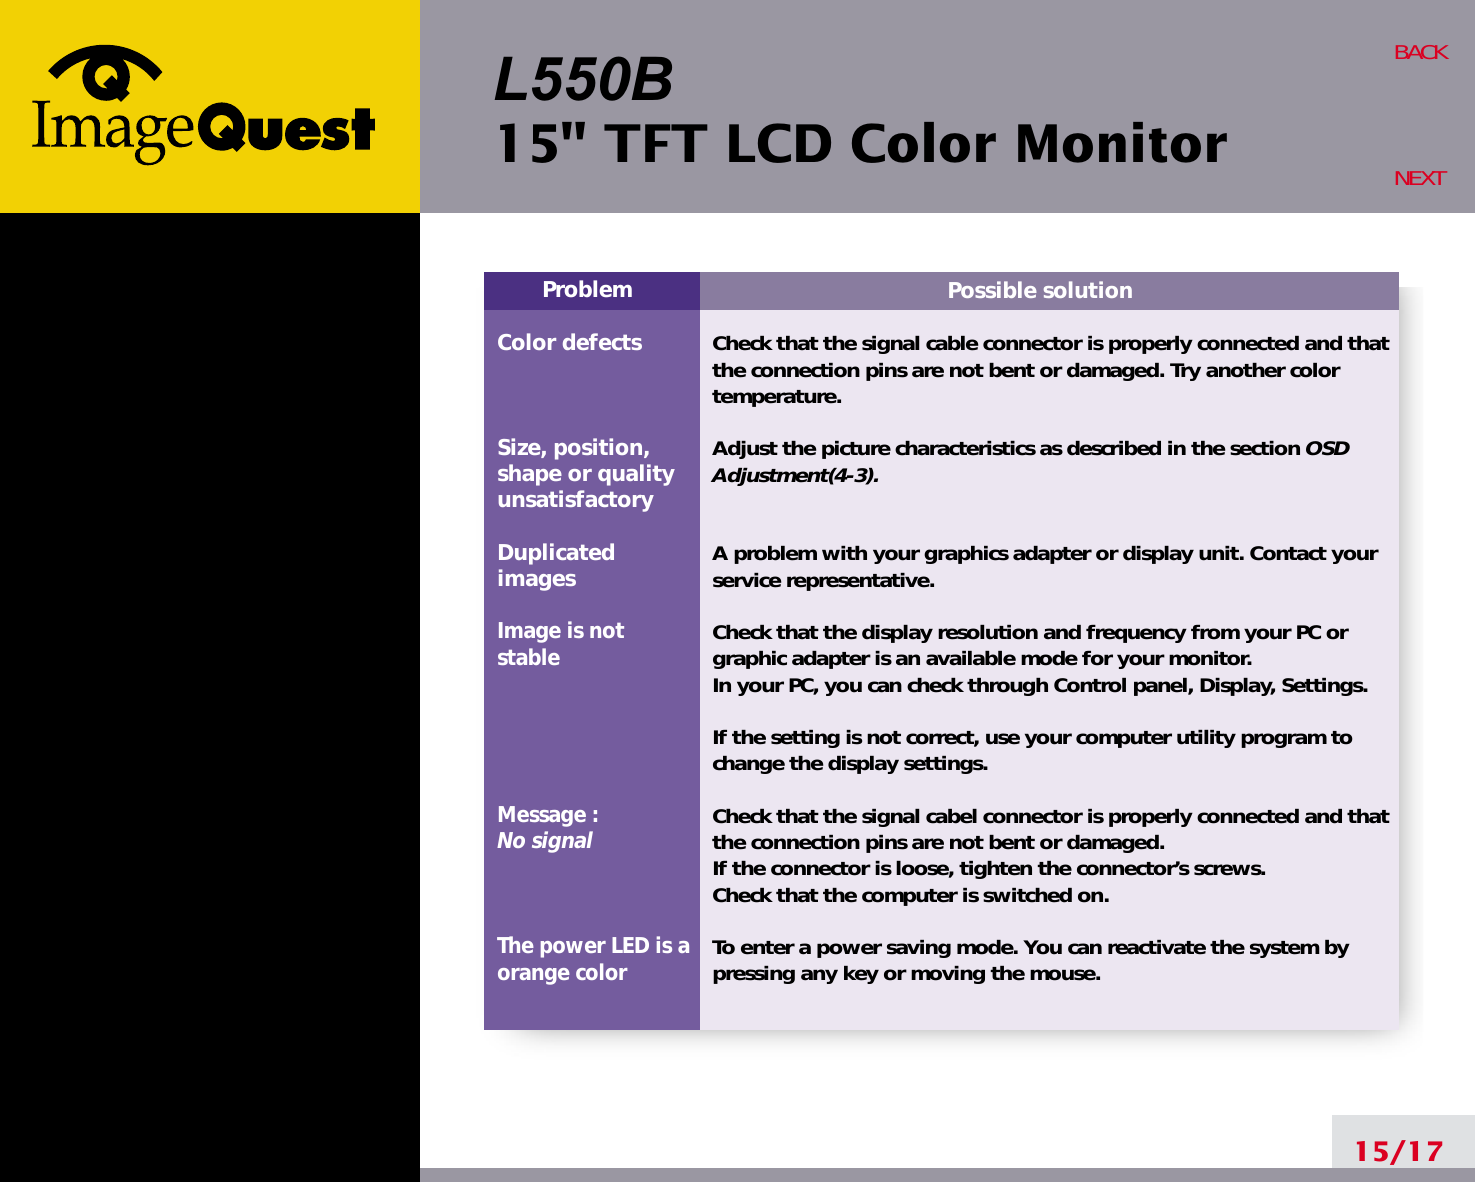 L550B15&quot; TFT LCD Color Monitor15/17BACKNEXTPossible solutionCheck that the signal cable connector is properly connected and thatthe connection pins are not bent or damaged. Try another colortemperature. Adjust the picture characteristics as described in the section OSDAdjustment(4-3).A problem with your graphics adapter or display unit. Contact yourservice representative.Check that the display resolution and frequency from your PC orgraphic adapter is an available mode for your monitor.In your PC, you can check through Control panel, Display, Settings.If the setting is not correct, use your computer utility program tochange the display settings.Check that the signal cabel connector is properly connected and thatthe connection pins are not bent or damaged.If the connector is loose, tighten the connector’s screws.Check that the computer is switched on.To enter a power saving mode. You can reactivate the system bypressing any key or moving the mouse.ProblemColor defectsSize, position,shape or qualityunsatisfactoryDuplicatedimagesImage is notstableMessage : No signalThe power LED is aorange color